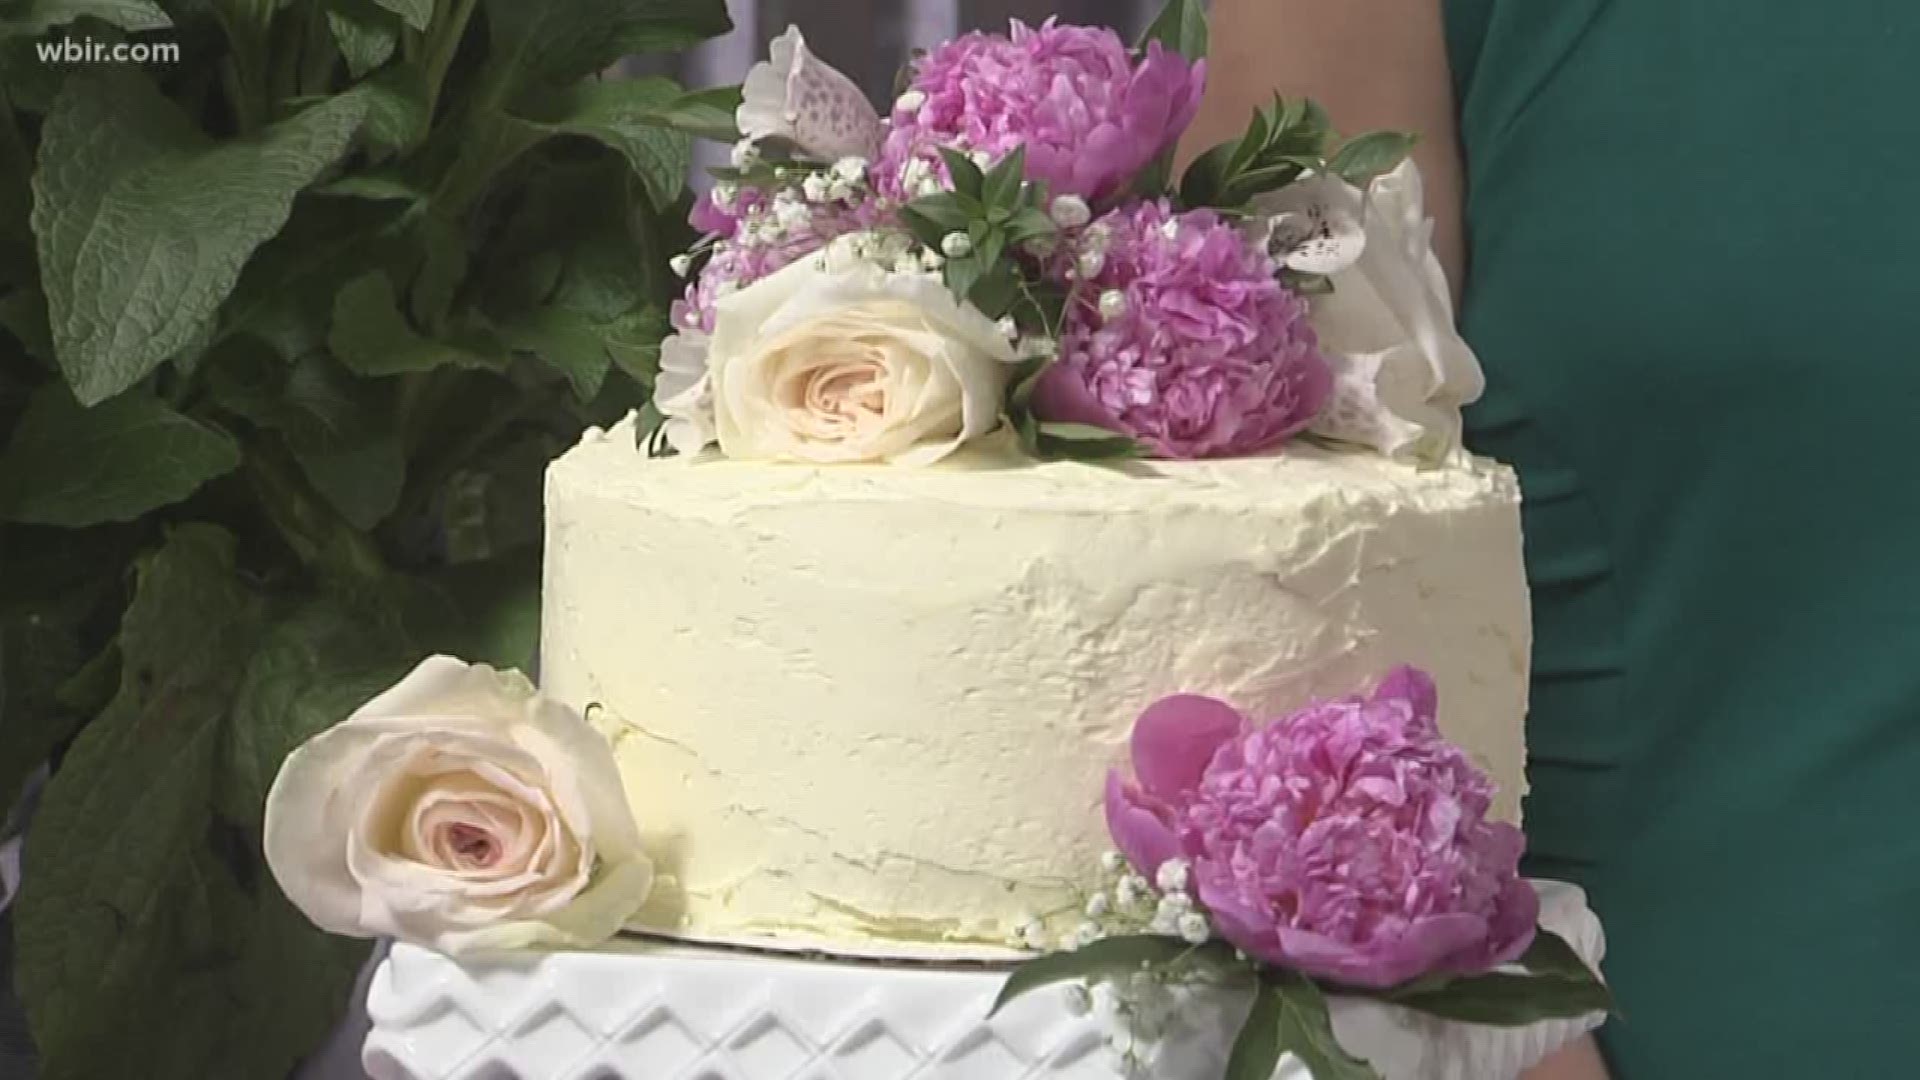 Deana Hurd is inspired by the Royal Wedding Cake with her Lemon and Elderflower cake.May 17, 2018-4pm